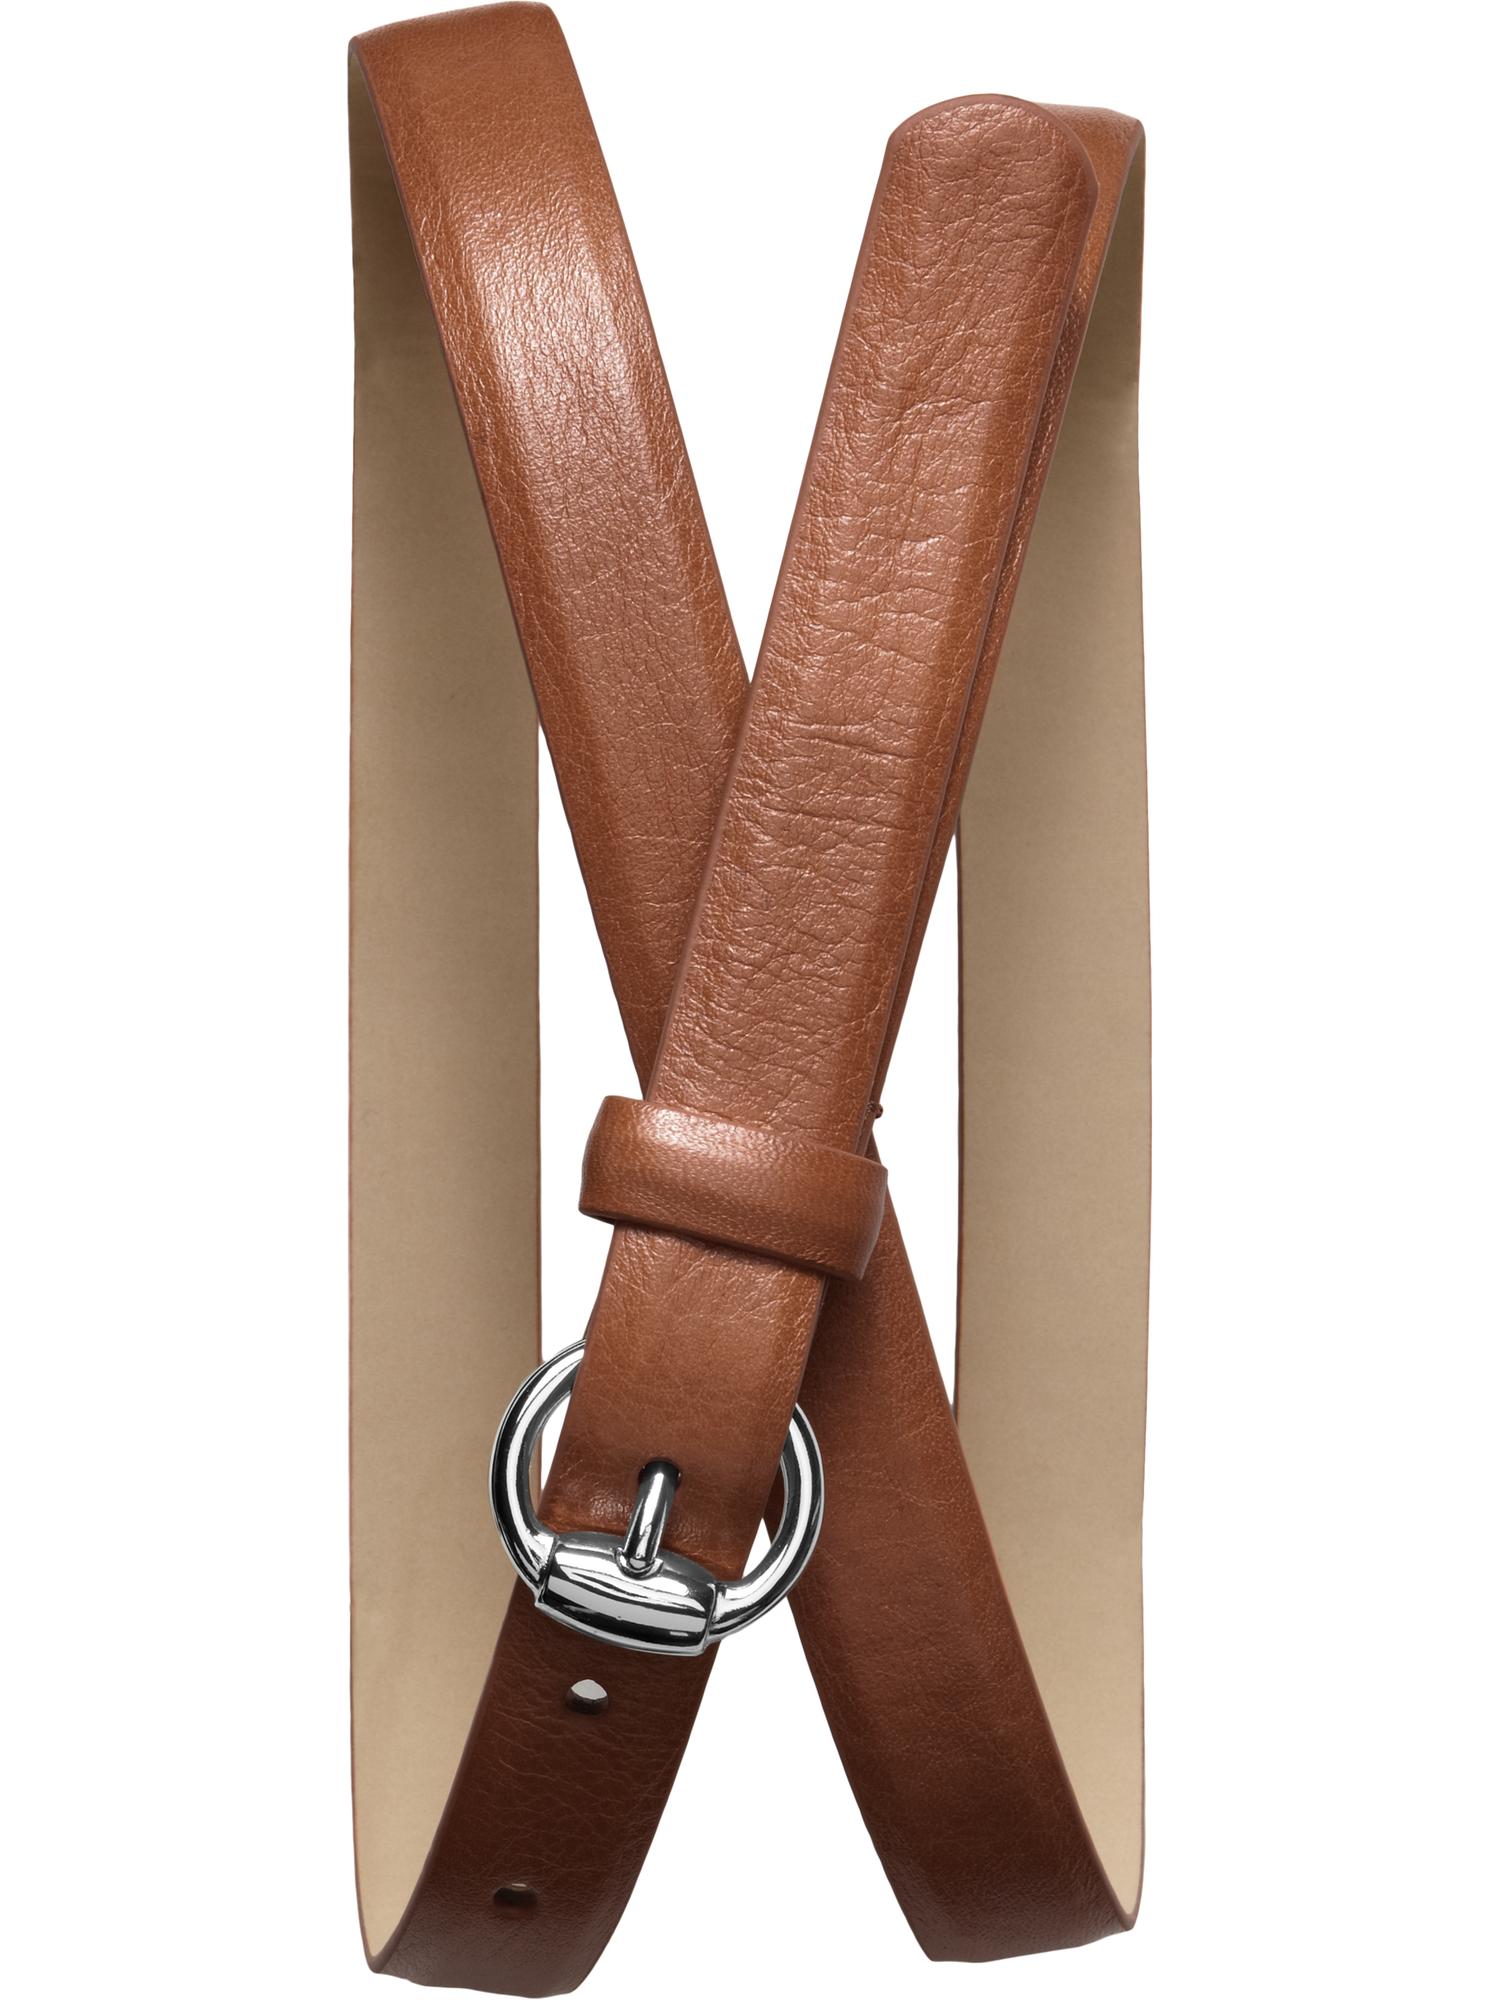 Round Buckle Leather Trouser Belt